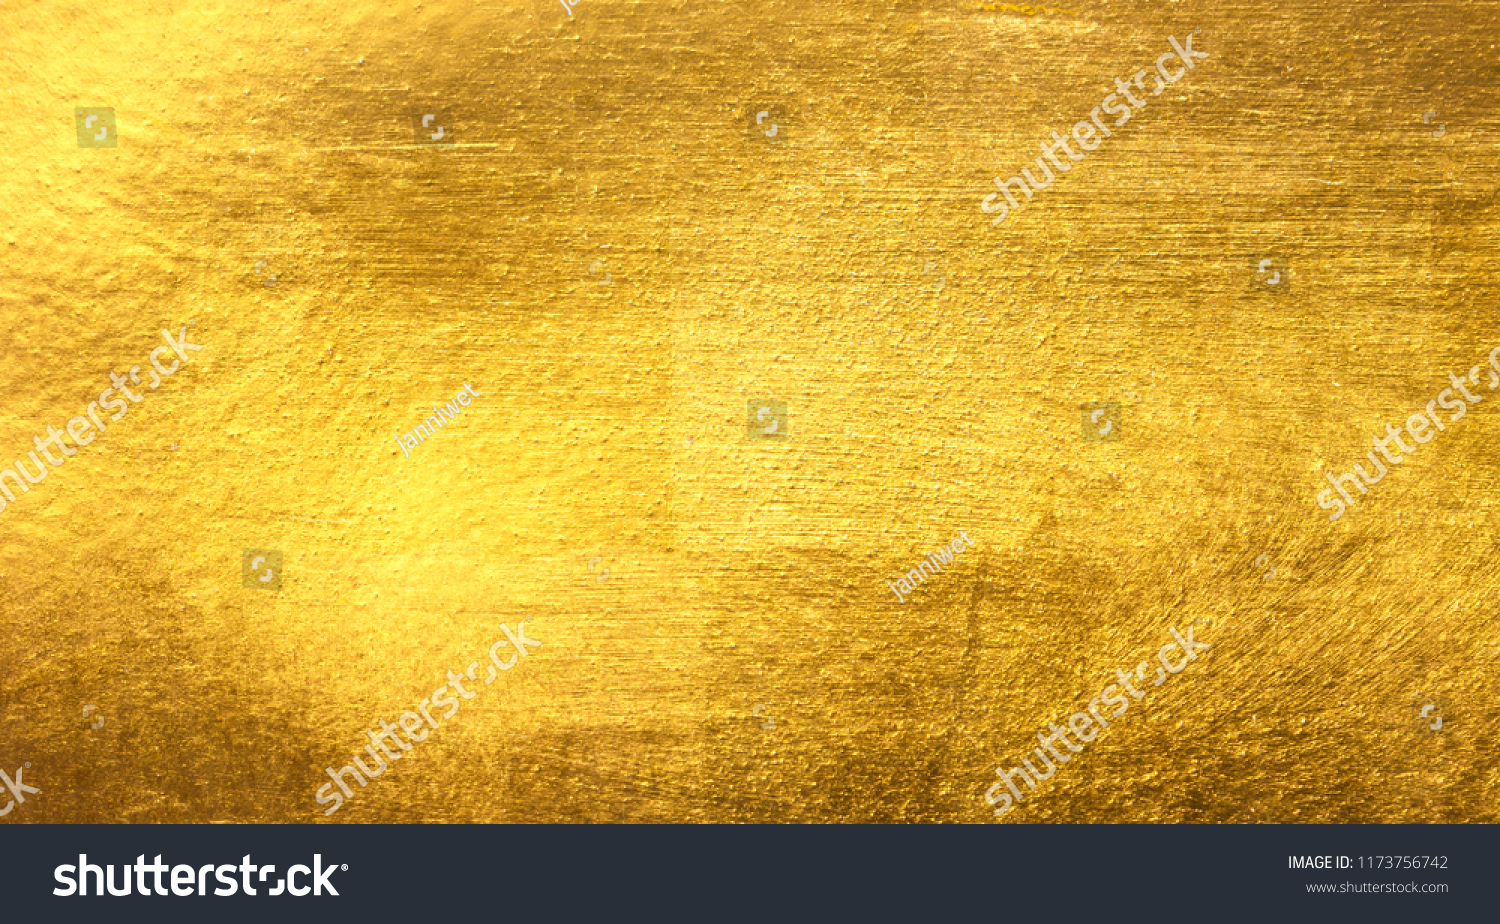 Gold background or texture and gradients shadow. #1173756742